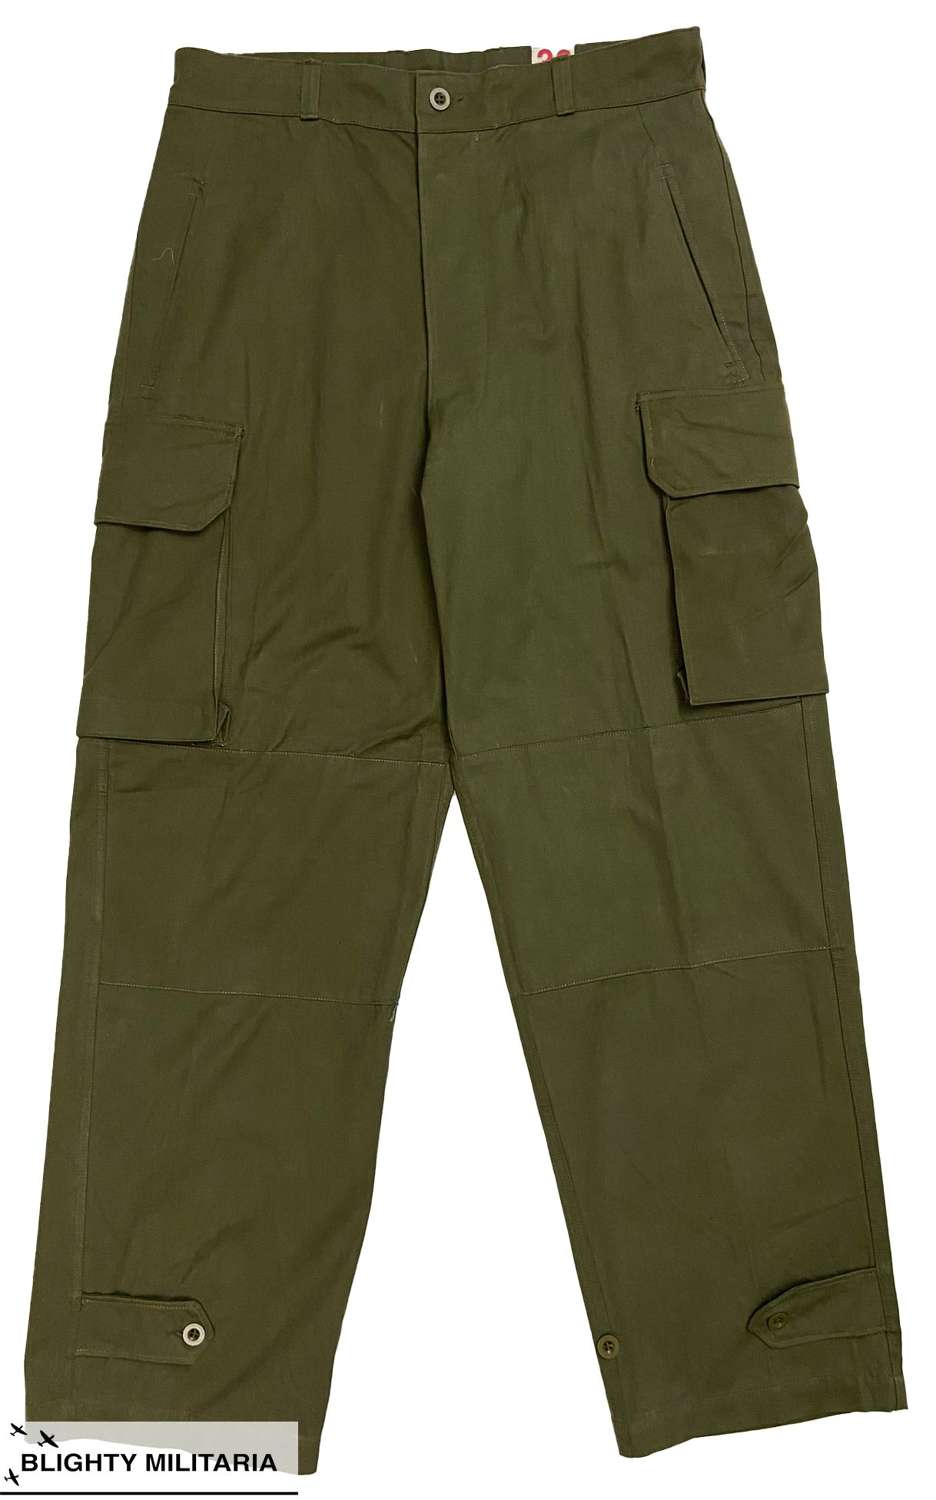 Original 1950s French Army M47 Combat Trousers - 34 x 32